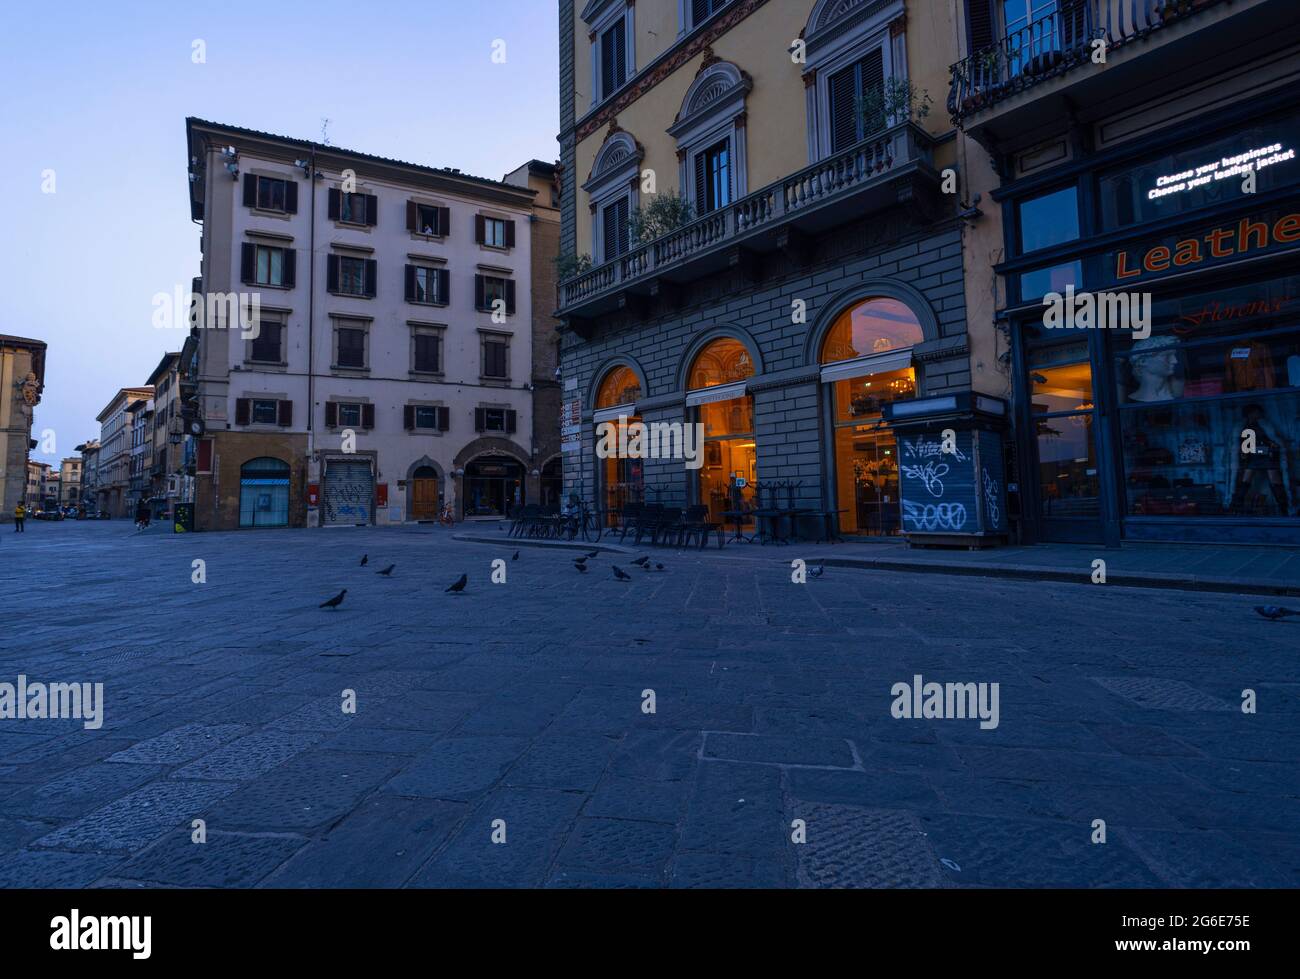 Opening store at piazza della signoria. Dawn in the morning. Blue hour in Florence, Italy. Stock Photo